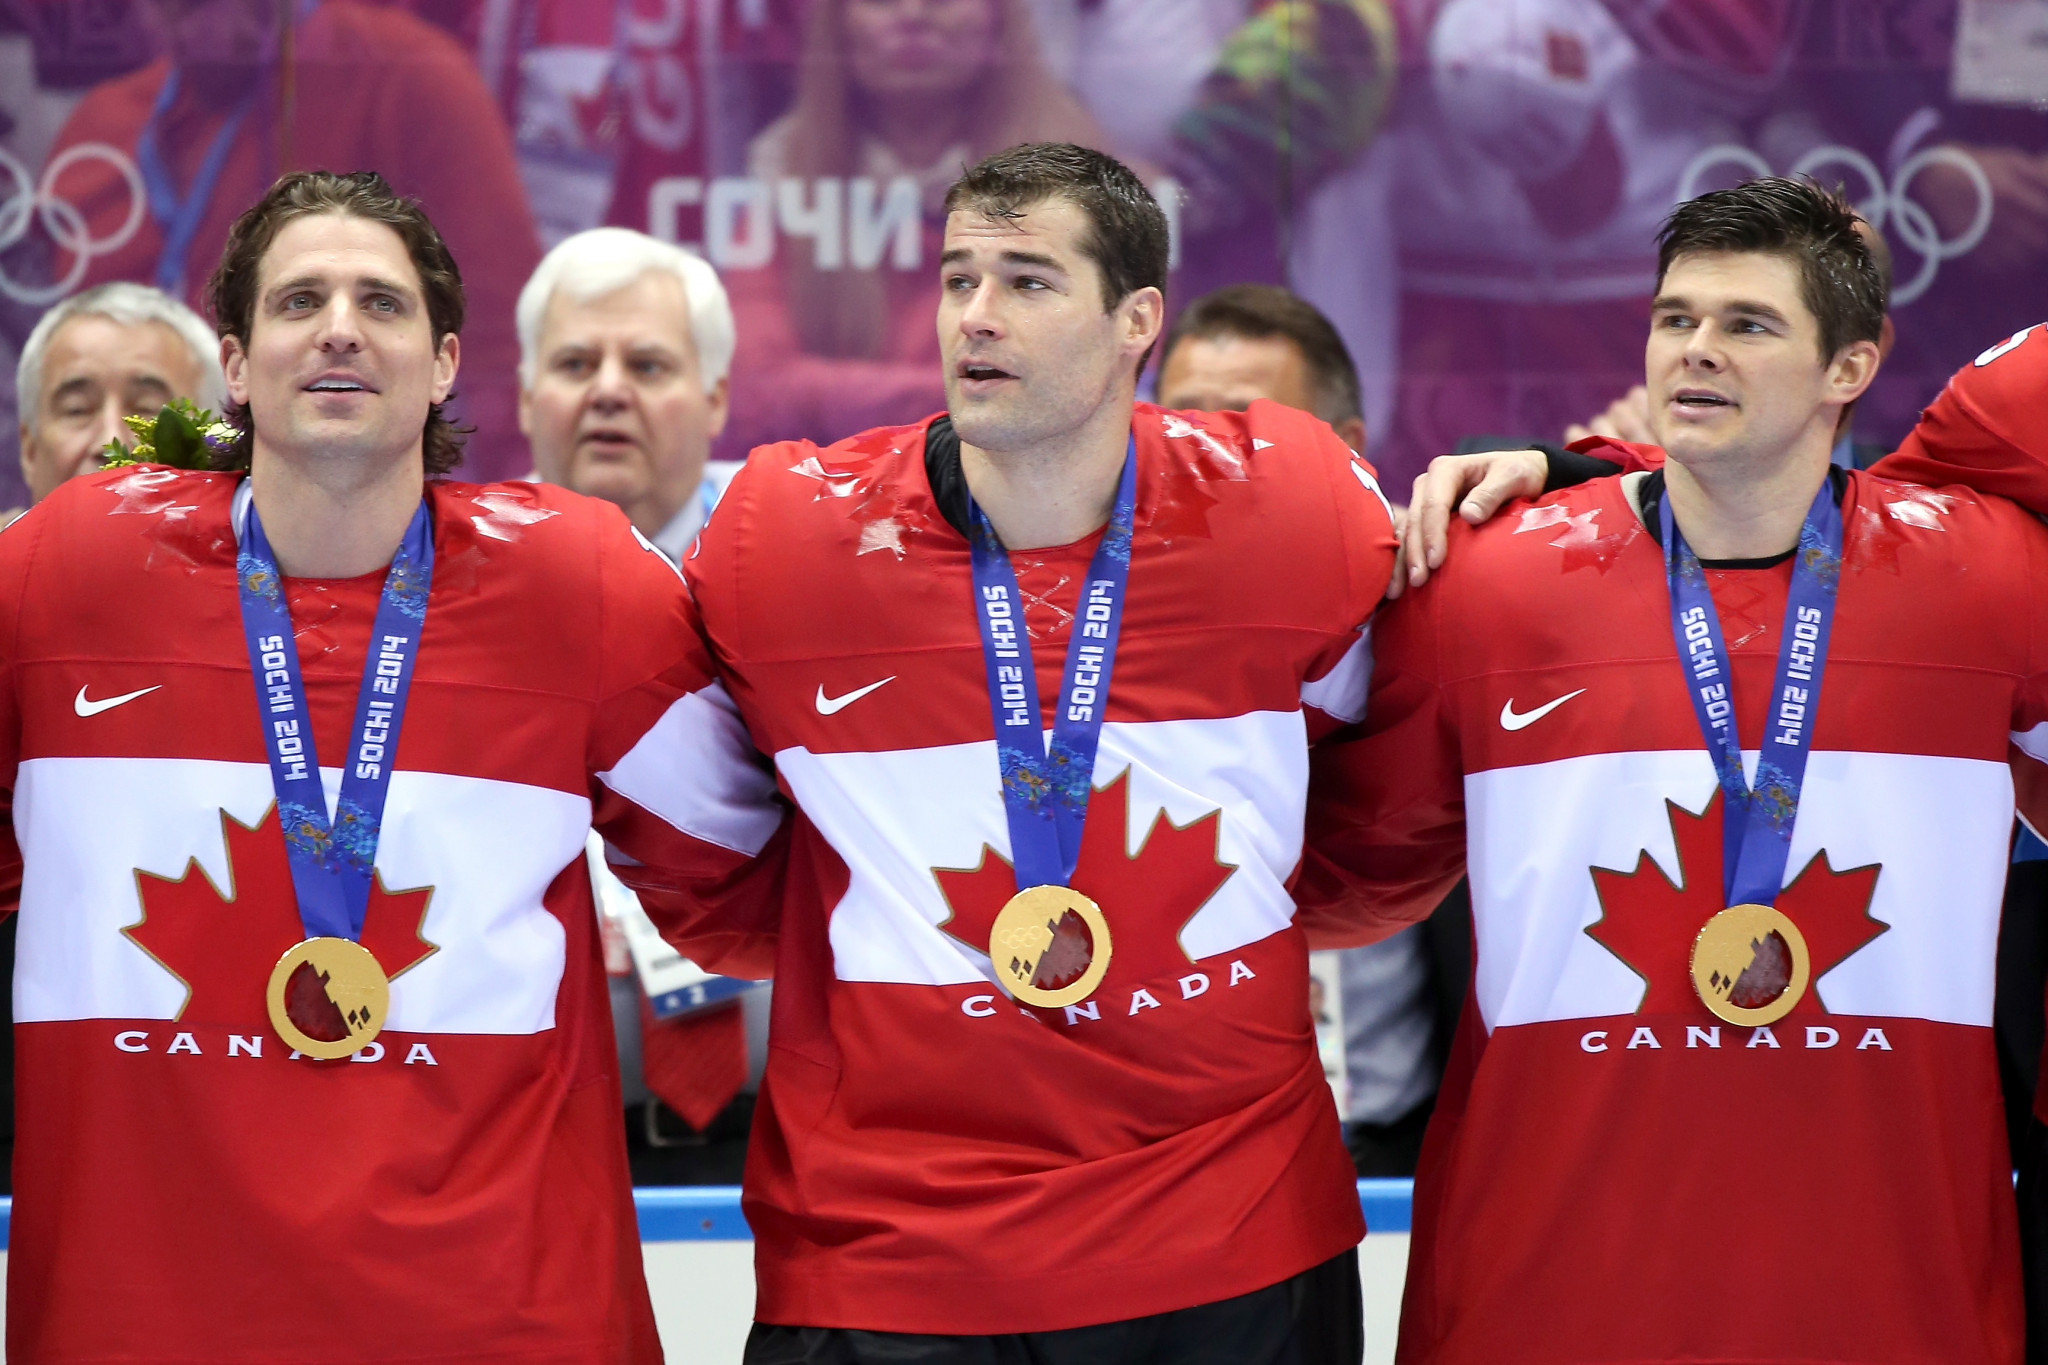 Chris Kunitz was part of the Canada team which won the Olympic gold medal at Sochi 2014 ©Getty Images